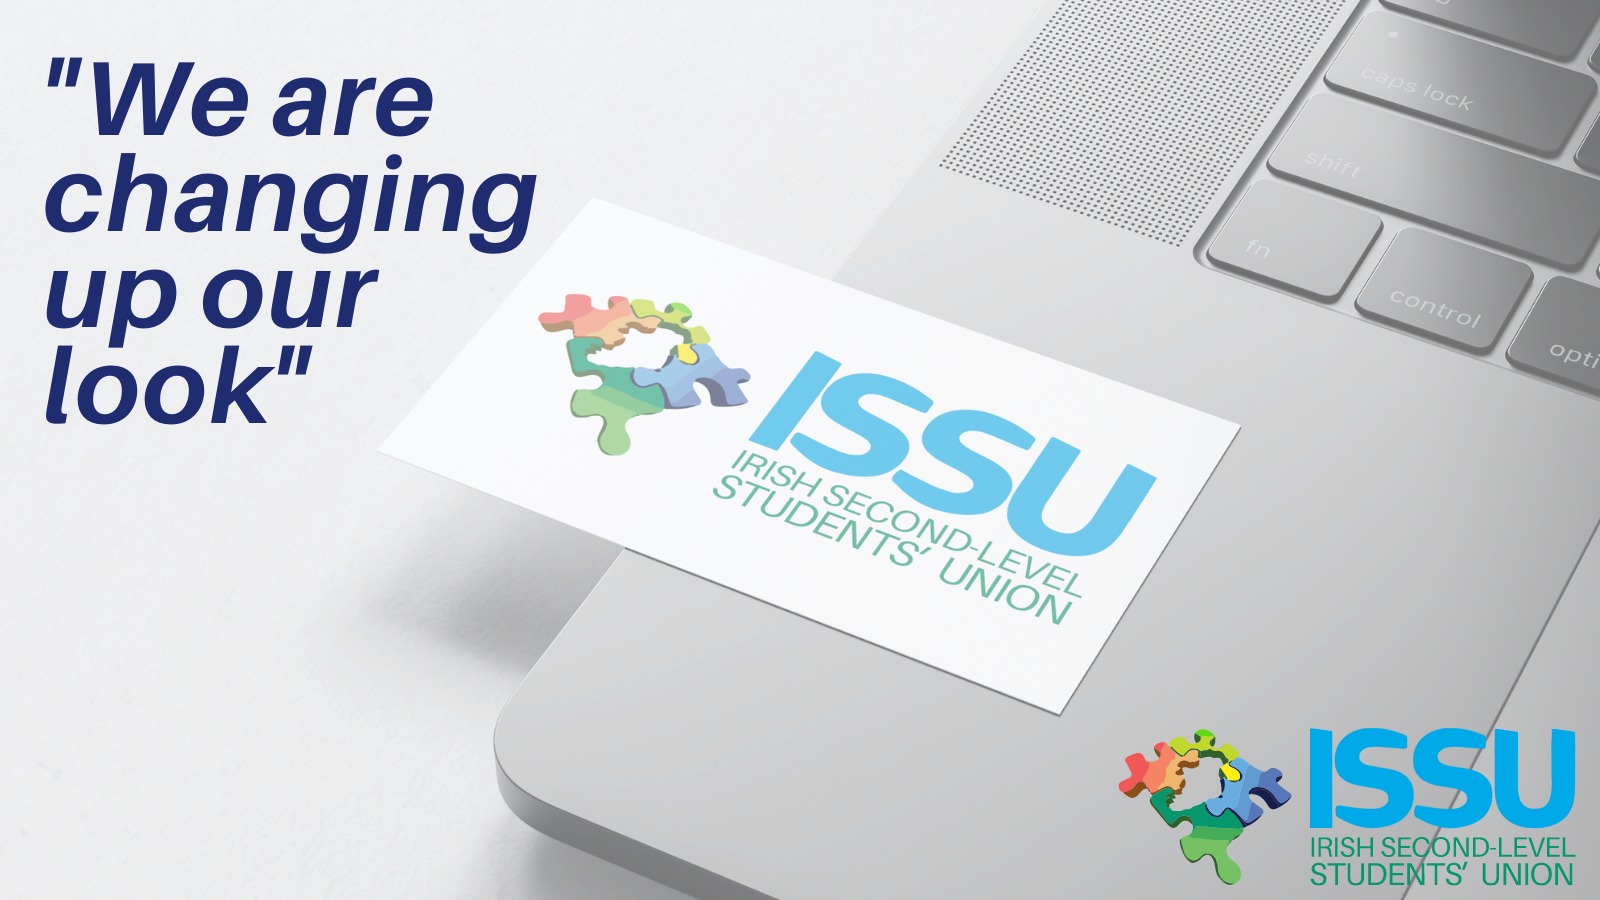 ISSU _We are changing up our look_ Social Media Graphic.png